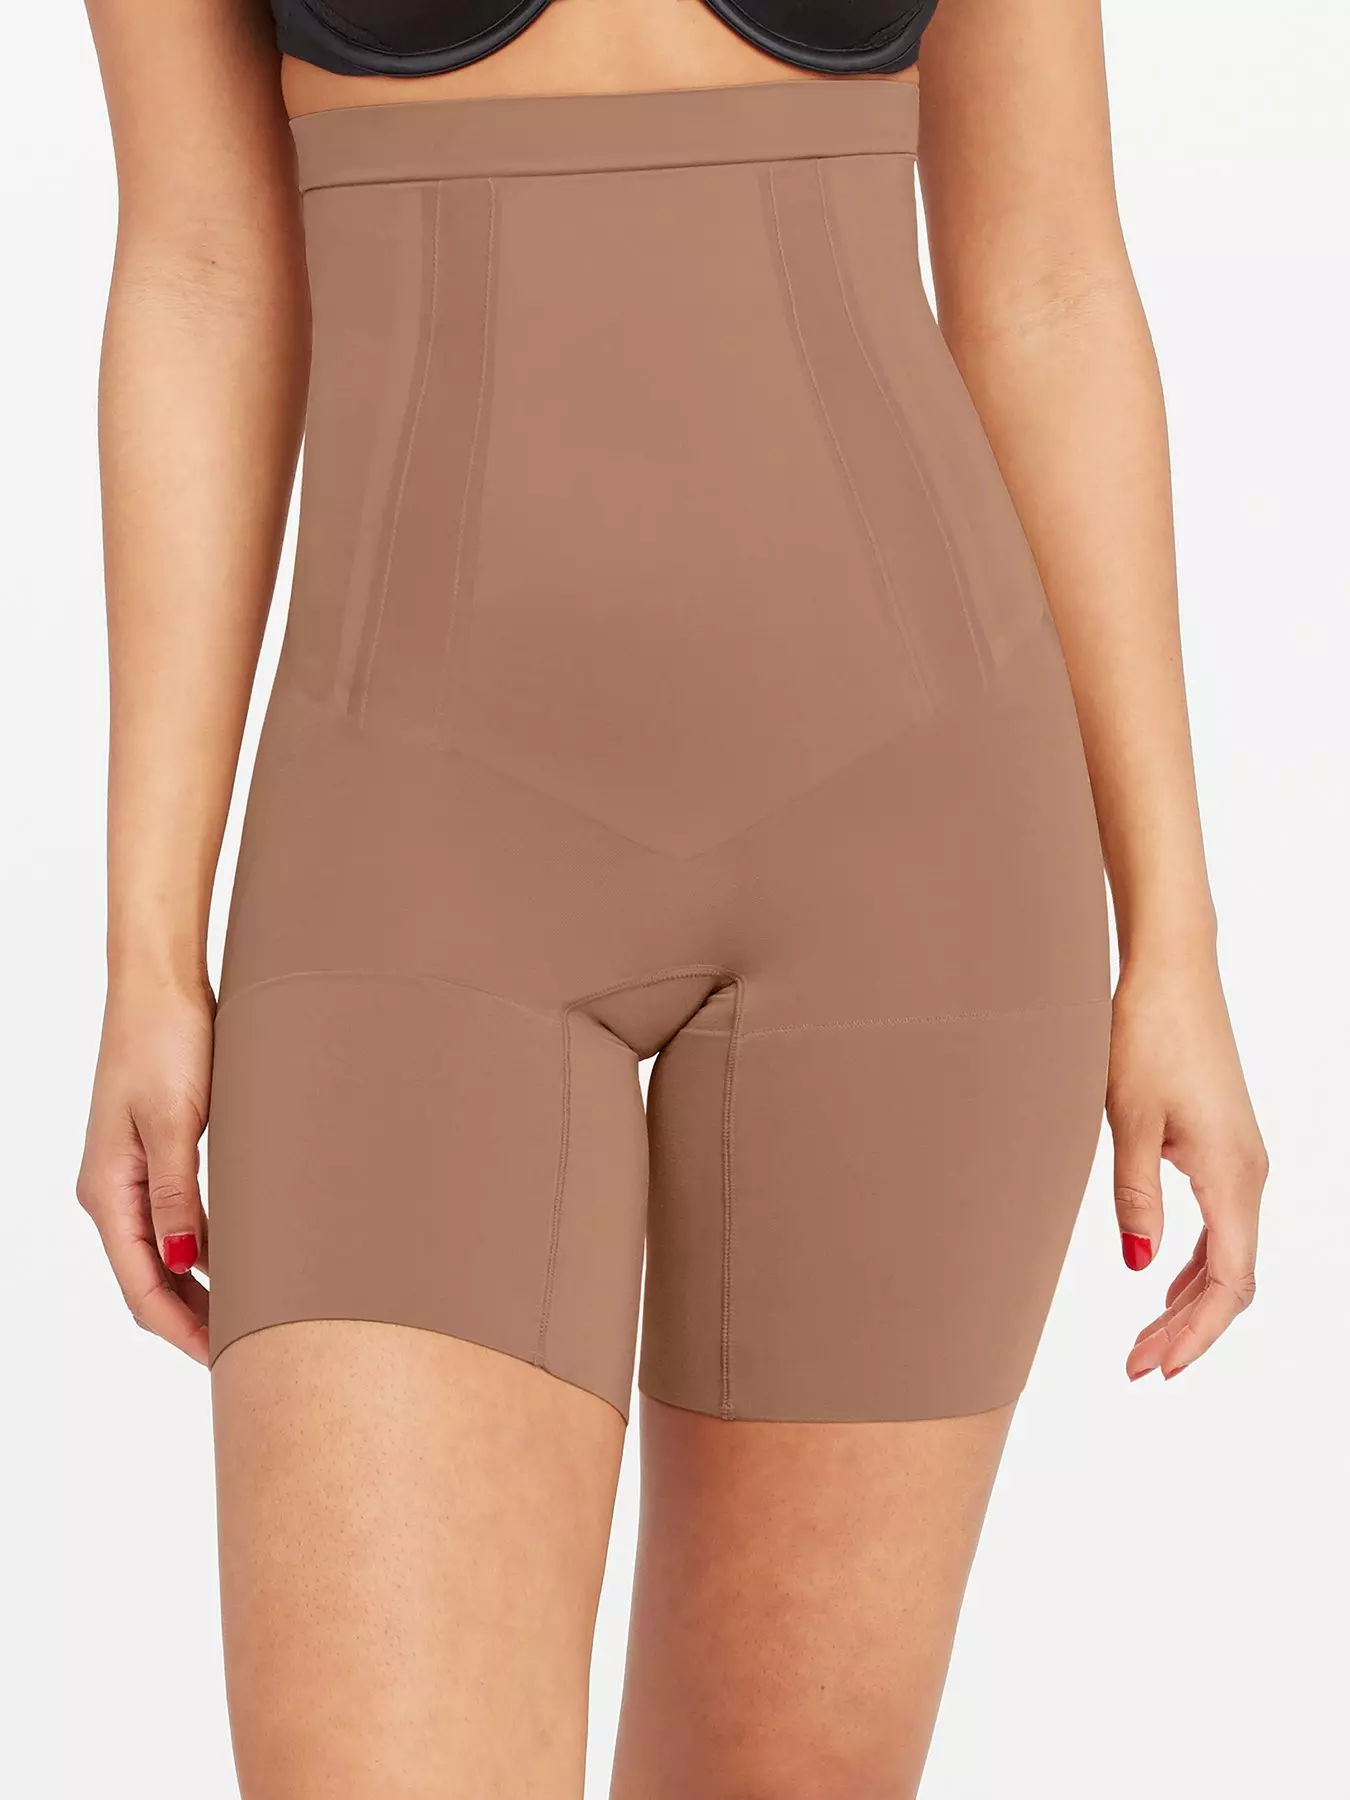 RED HOT by SPANX High-Waist Mid-Thigh Shaping Shorts Beige Size 3 (Large) -  NWT